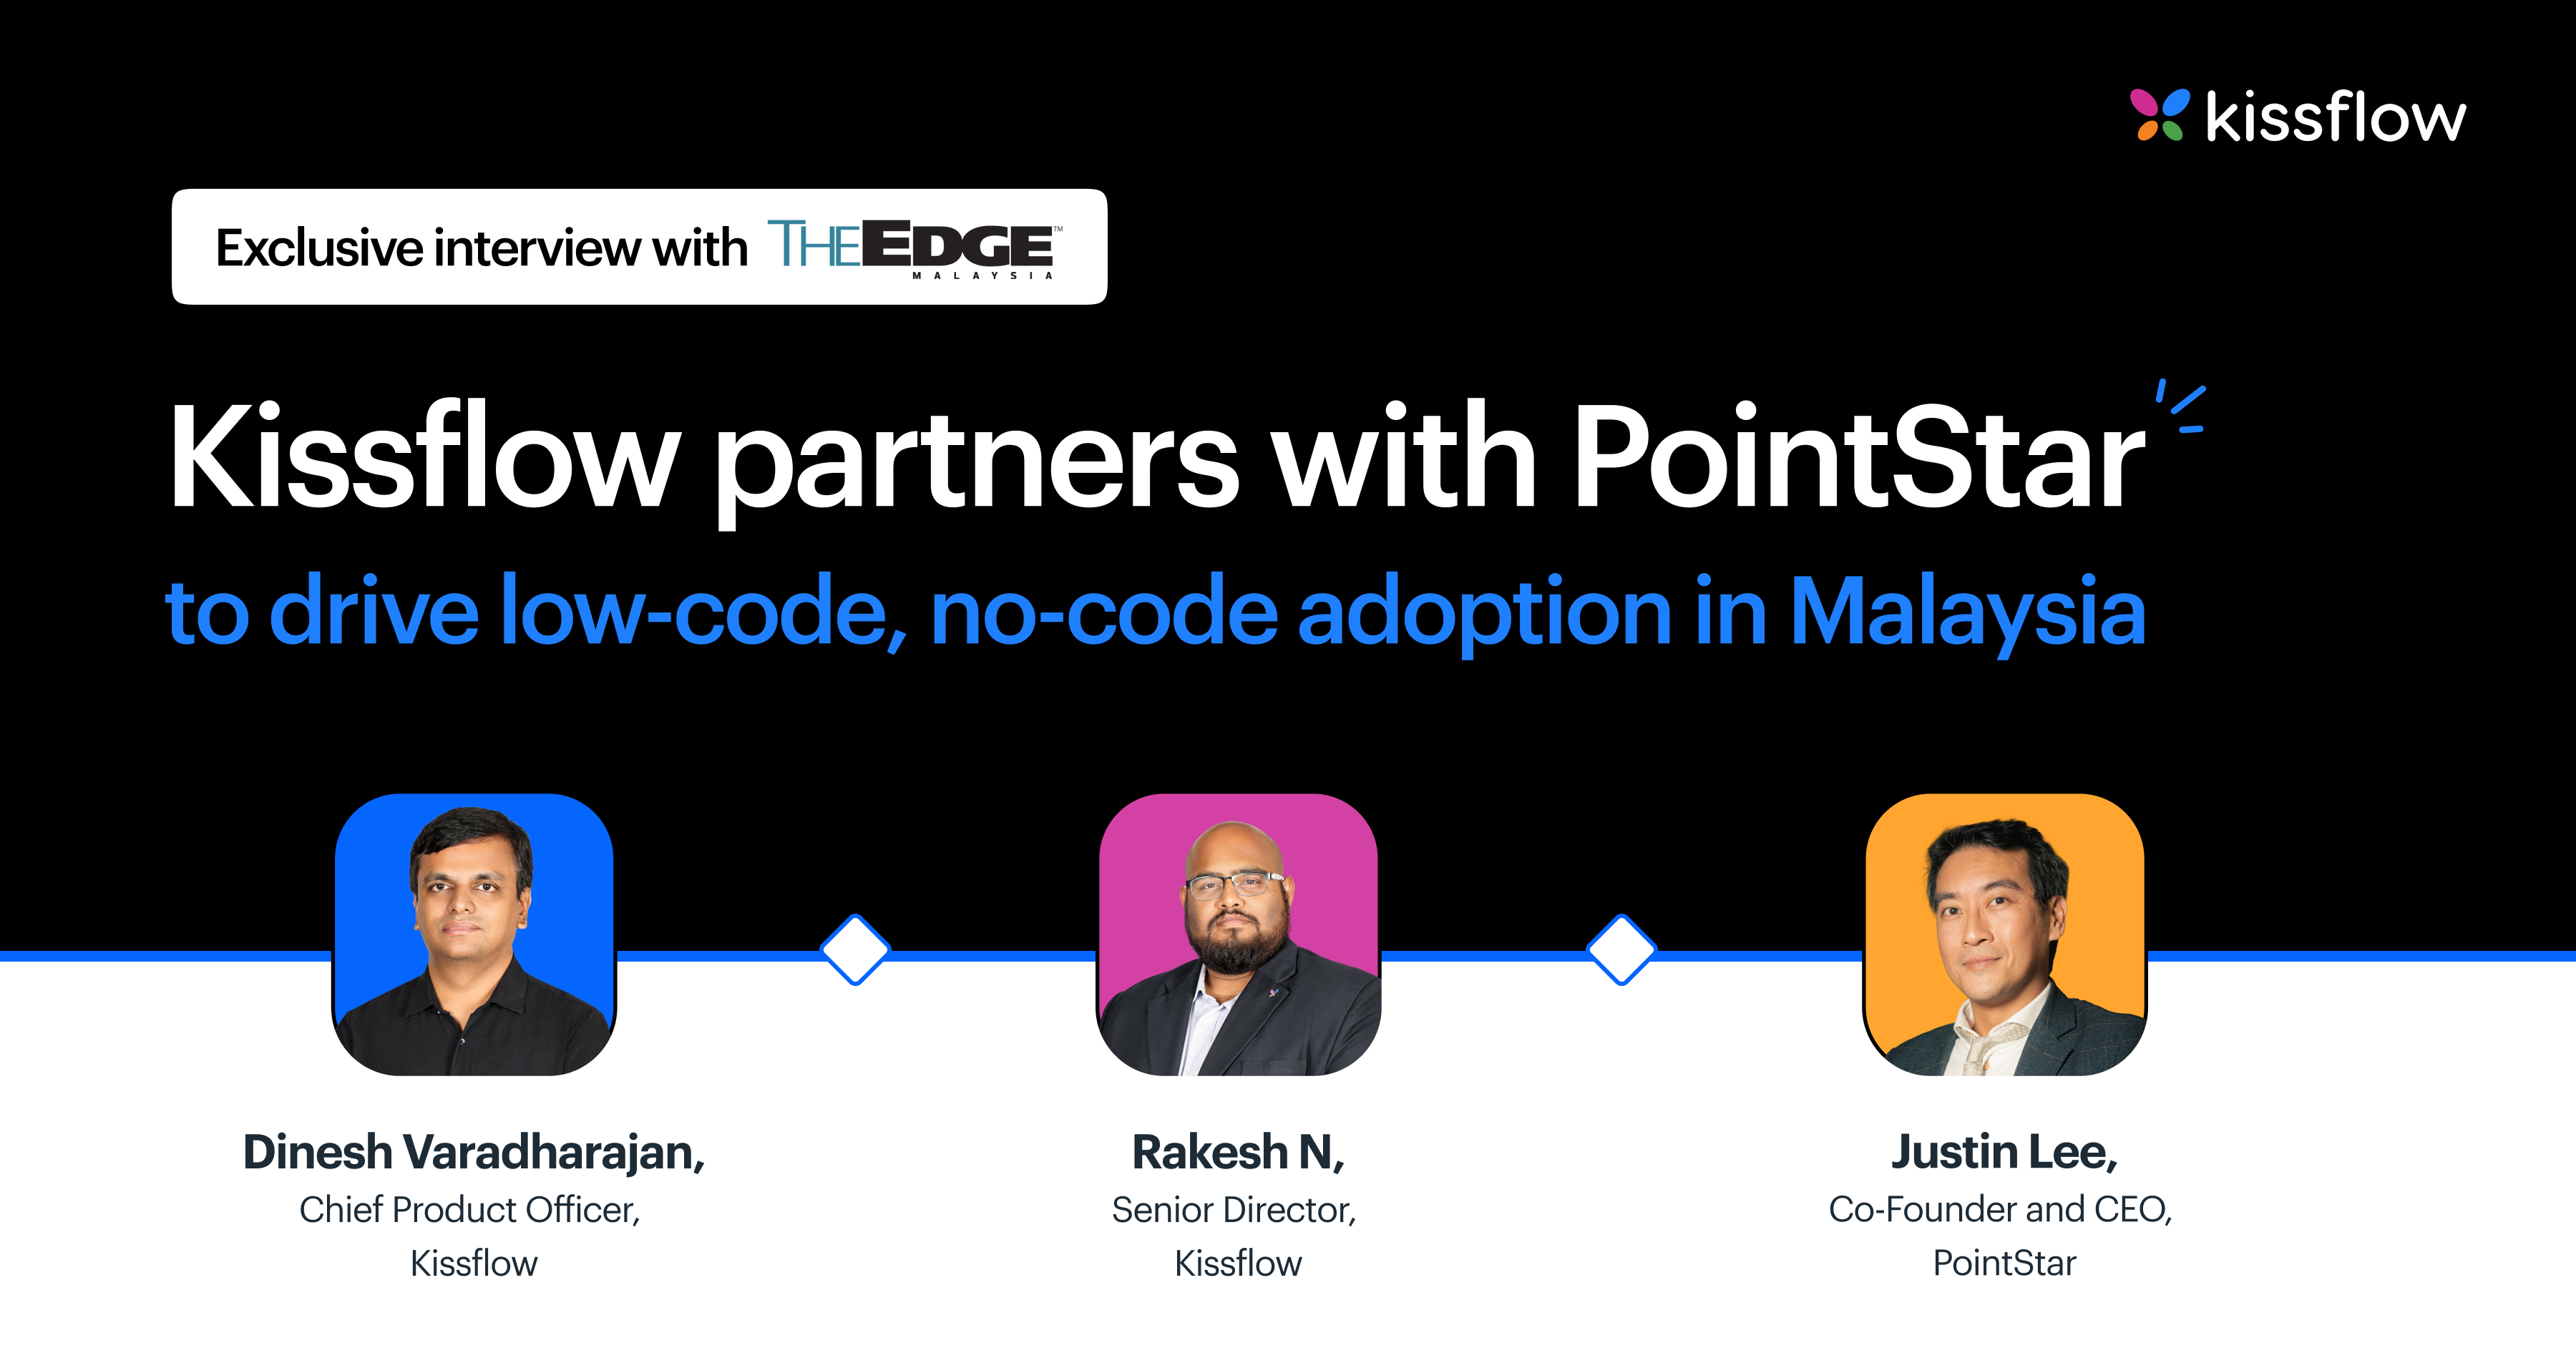 Kissflow partners with PointStar, to drive low-code, no-code adoption in Singapore & Malaysia